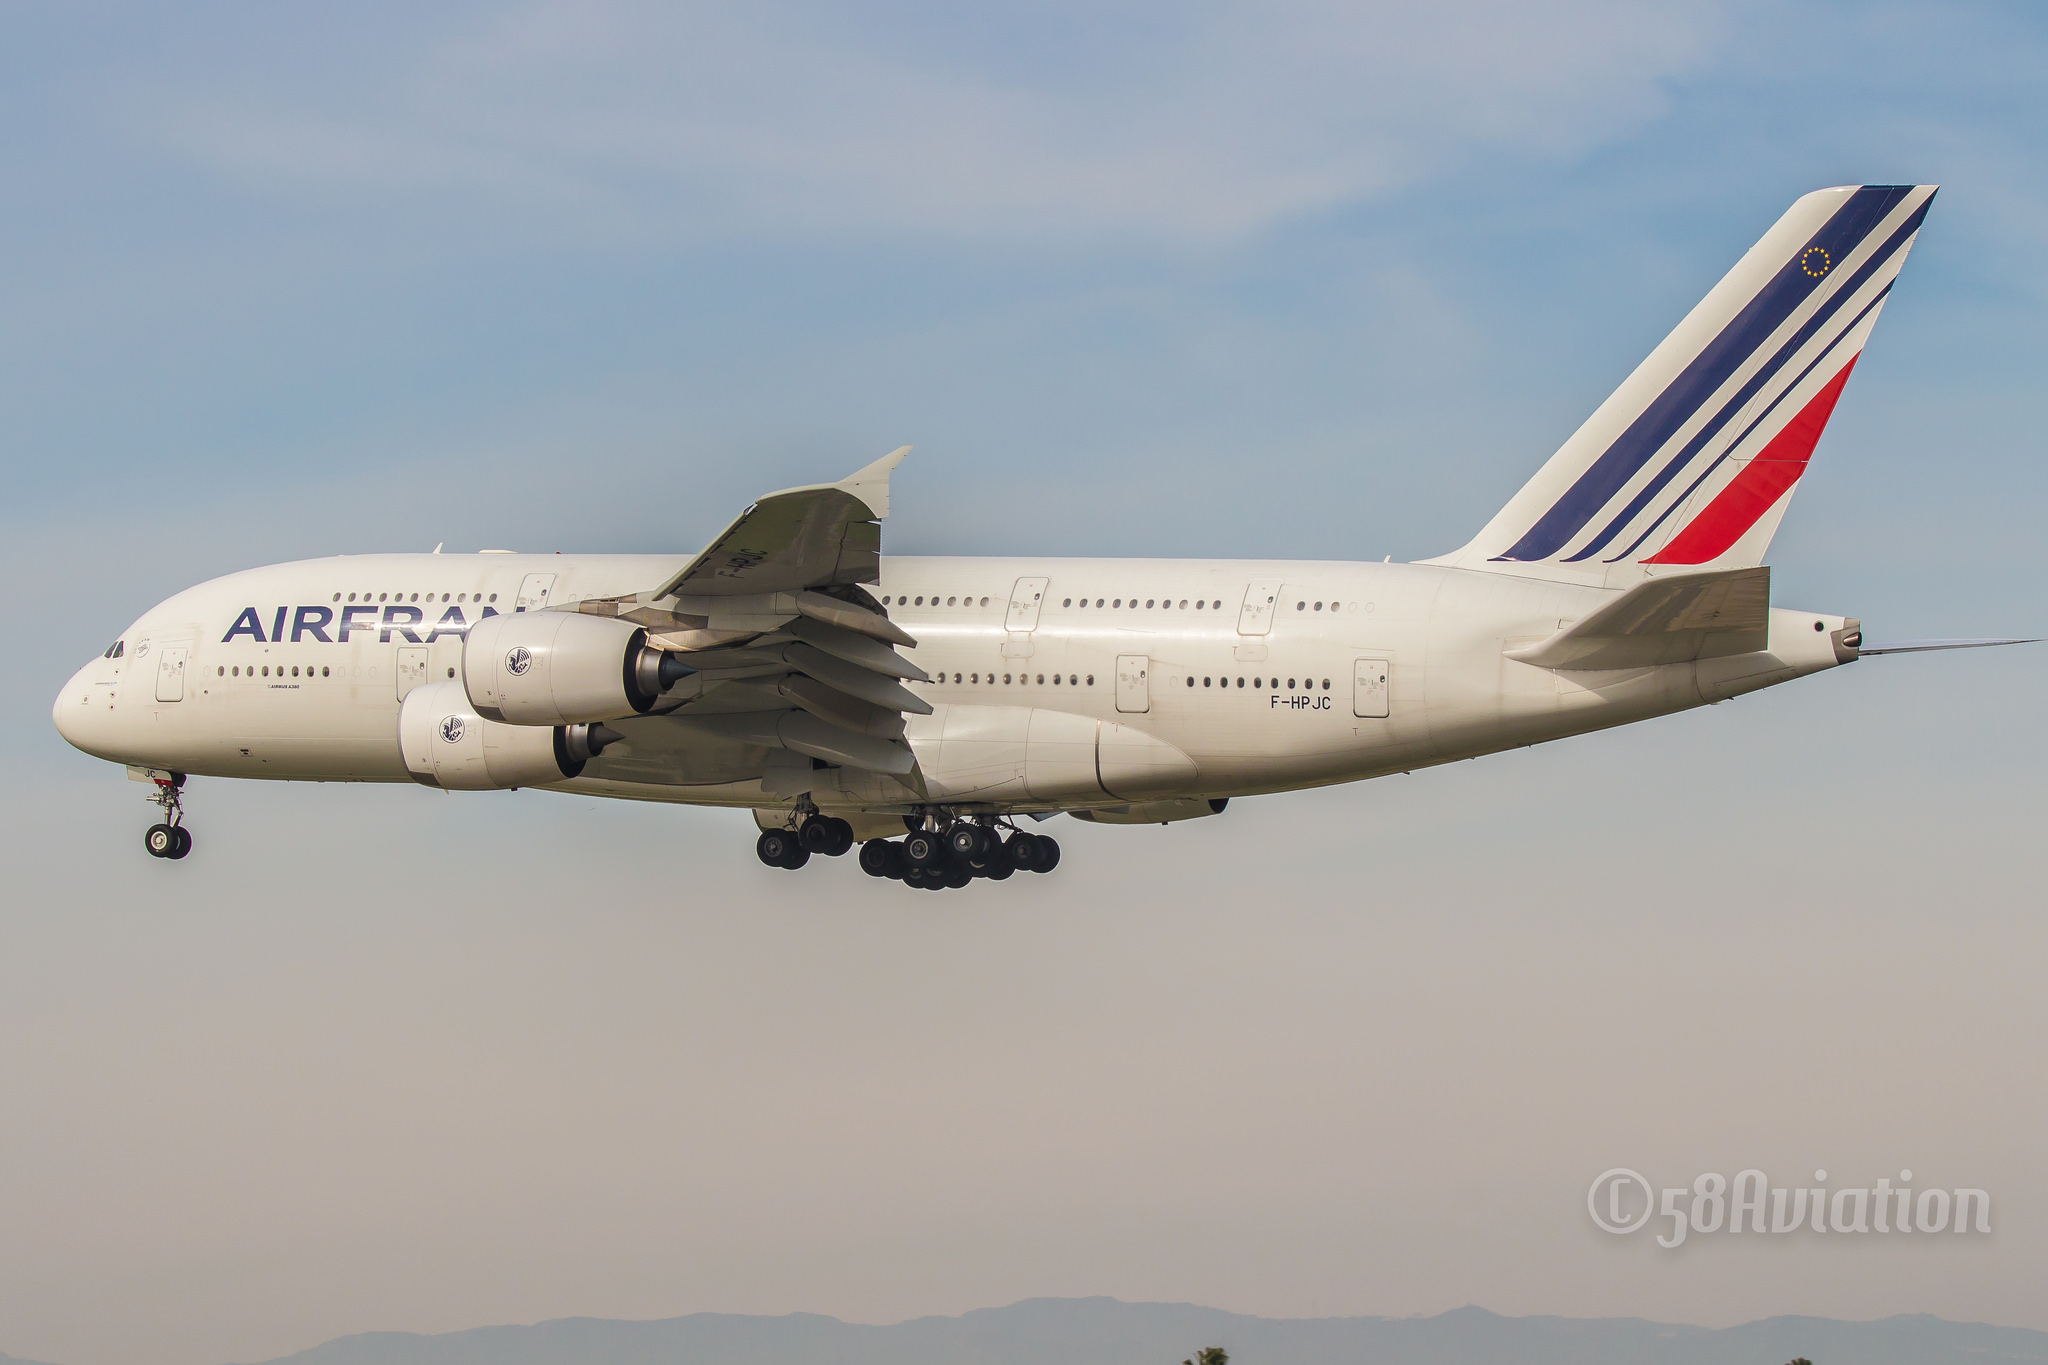 Photo of Air France F-HPJC, Airbus A380-800